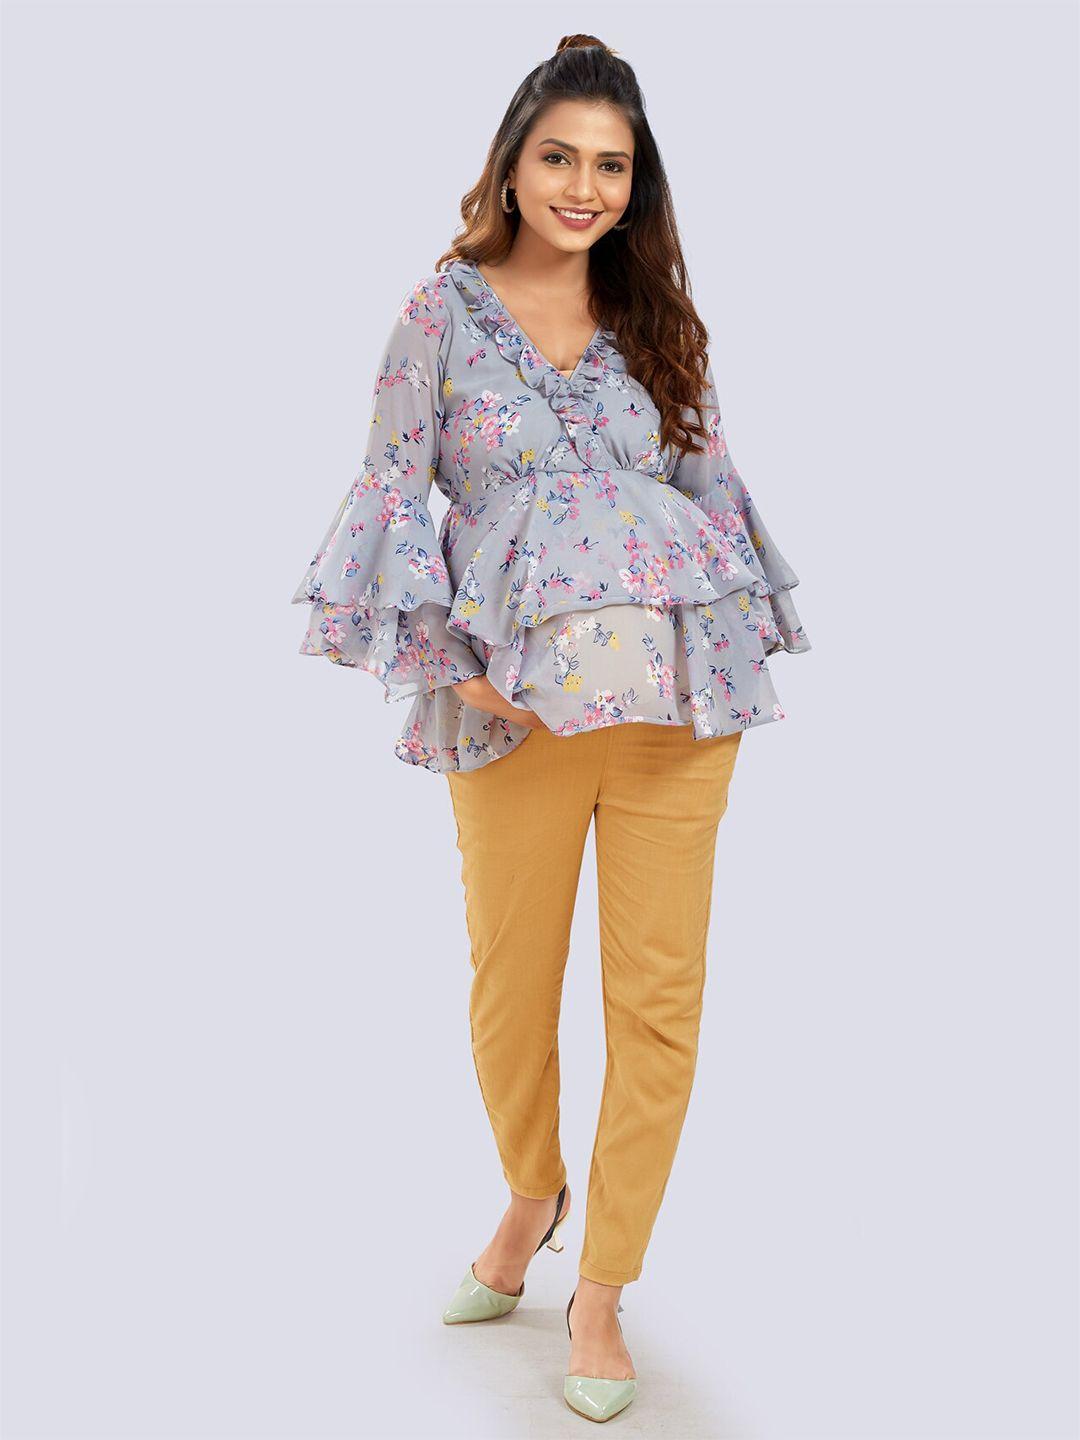 mom for sure by ketki dalal maternity grey & pink floral print empire top